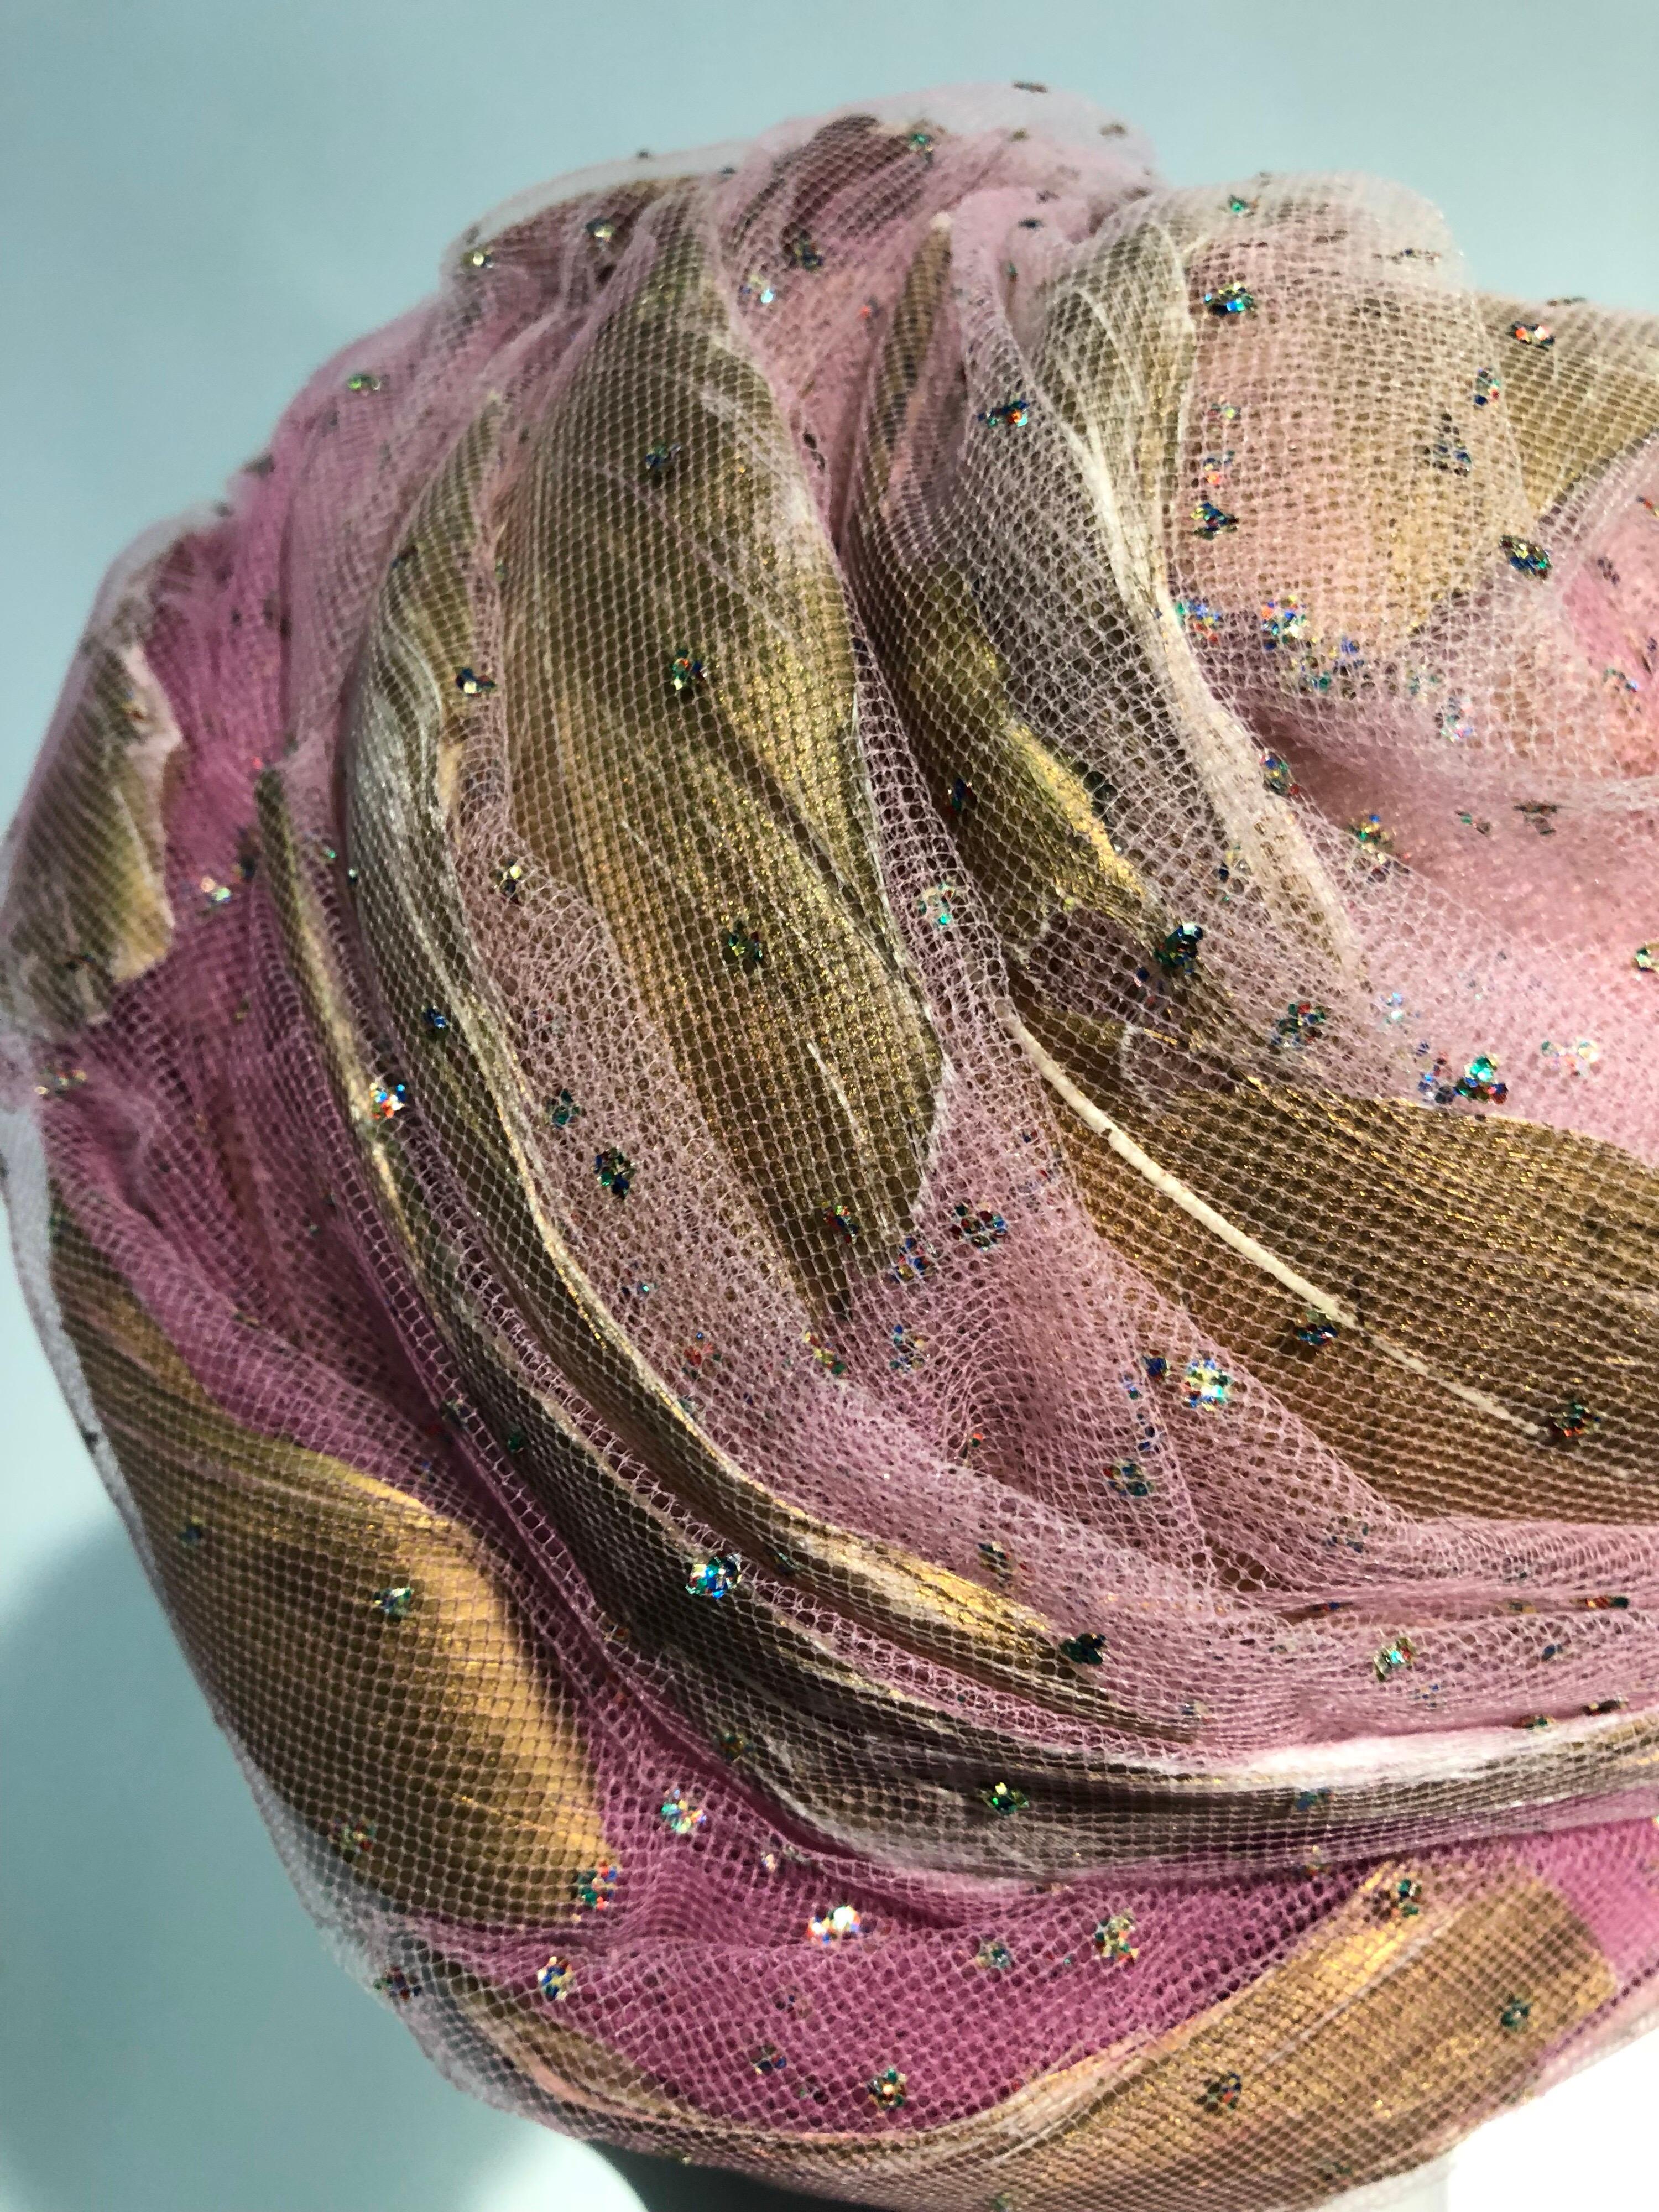 Women's 1960s Christian Dior Beeehive Turban Style Hat In Pink Tulle & Gold Feathers